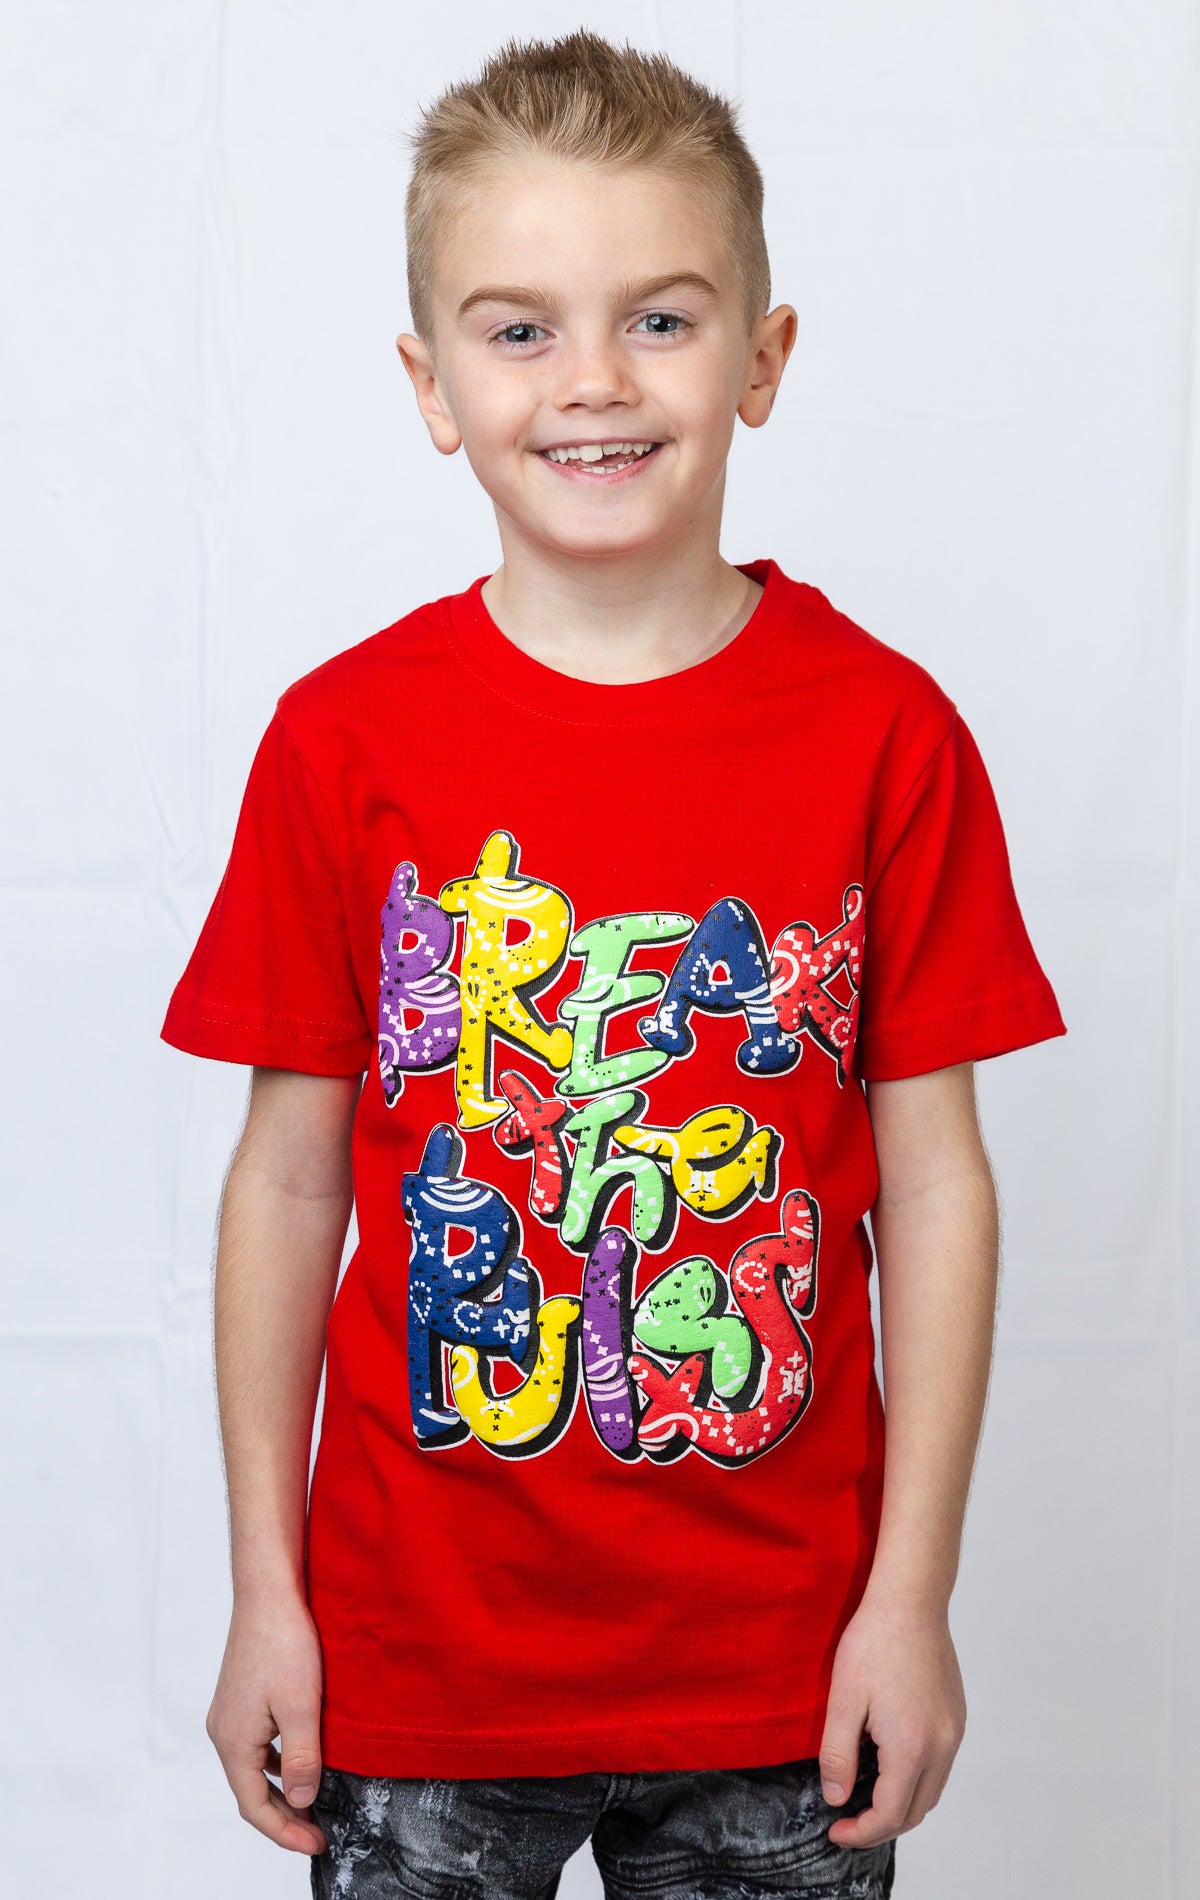 Red Break the rules kids graphic t shirt